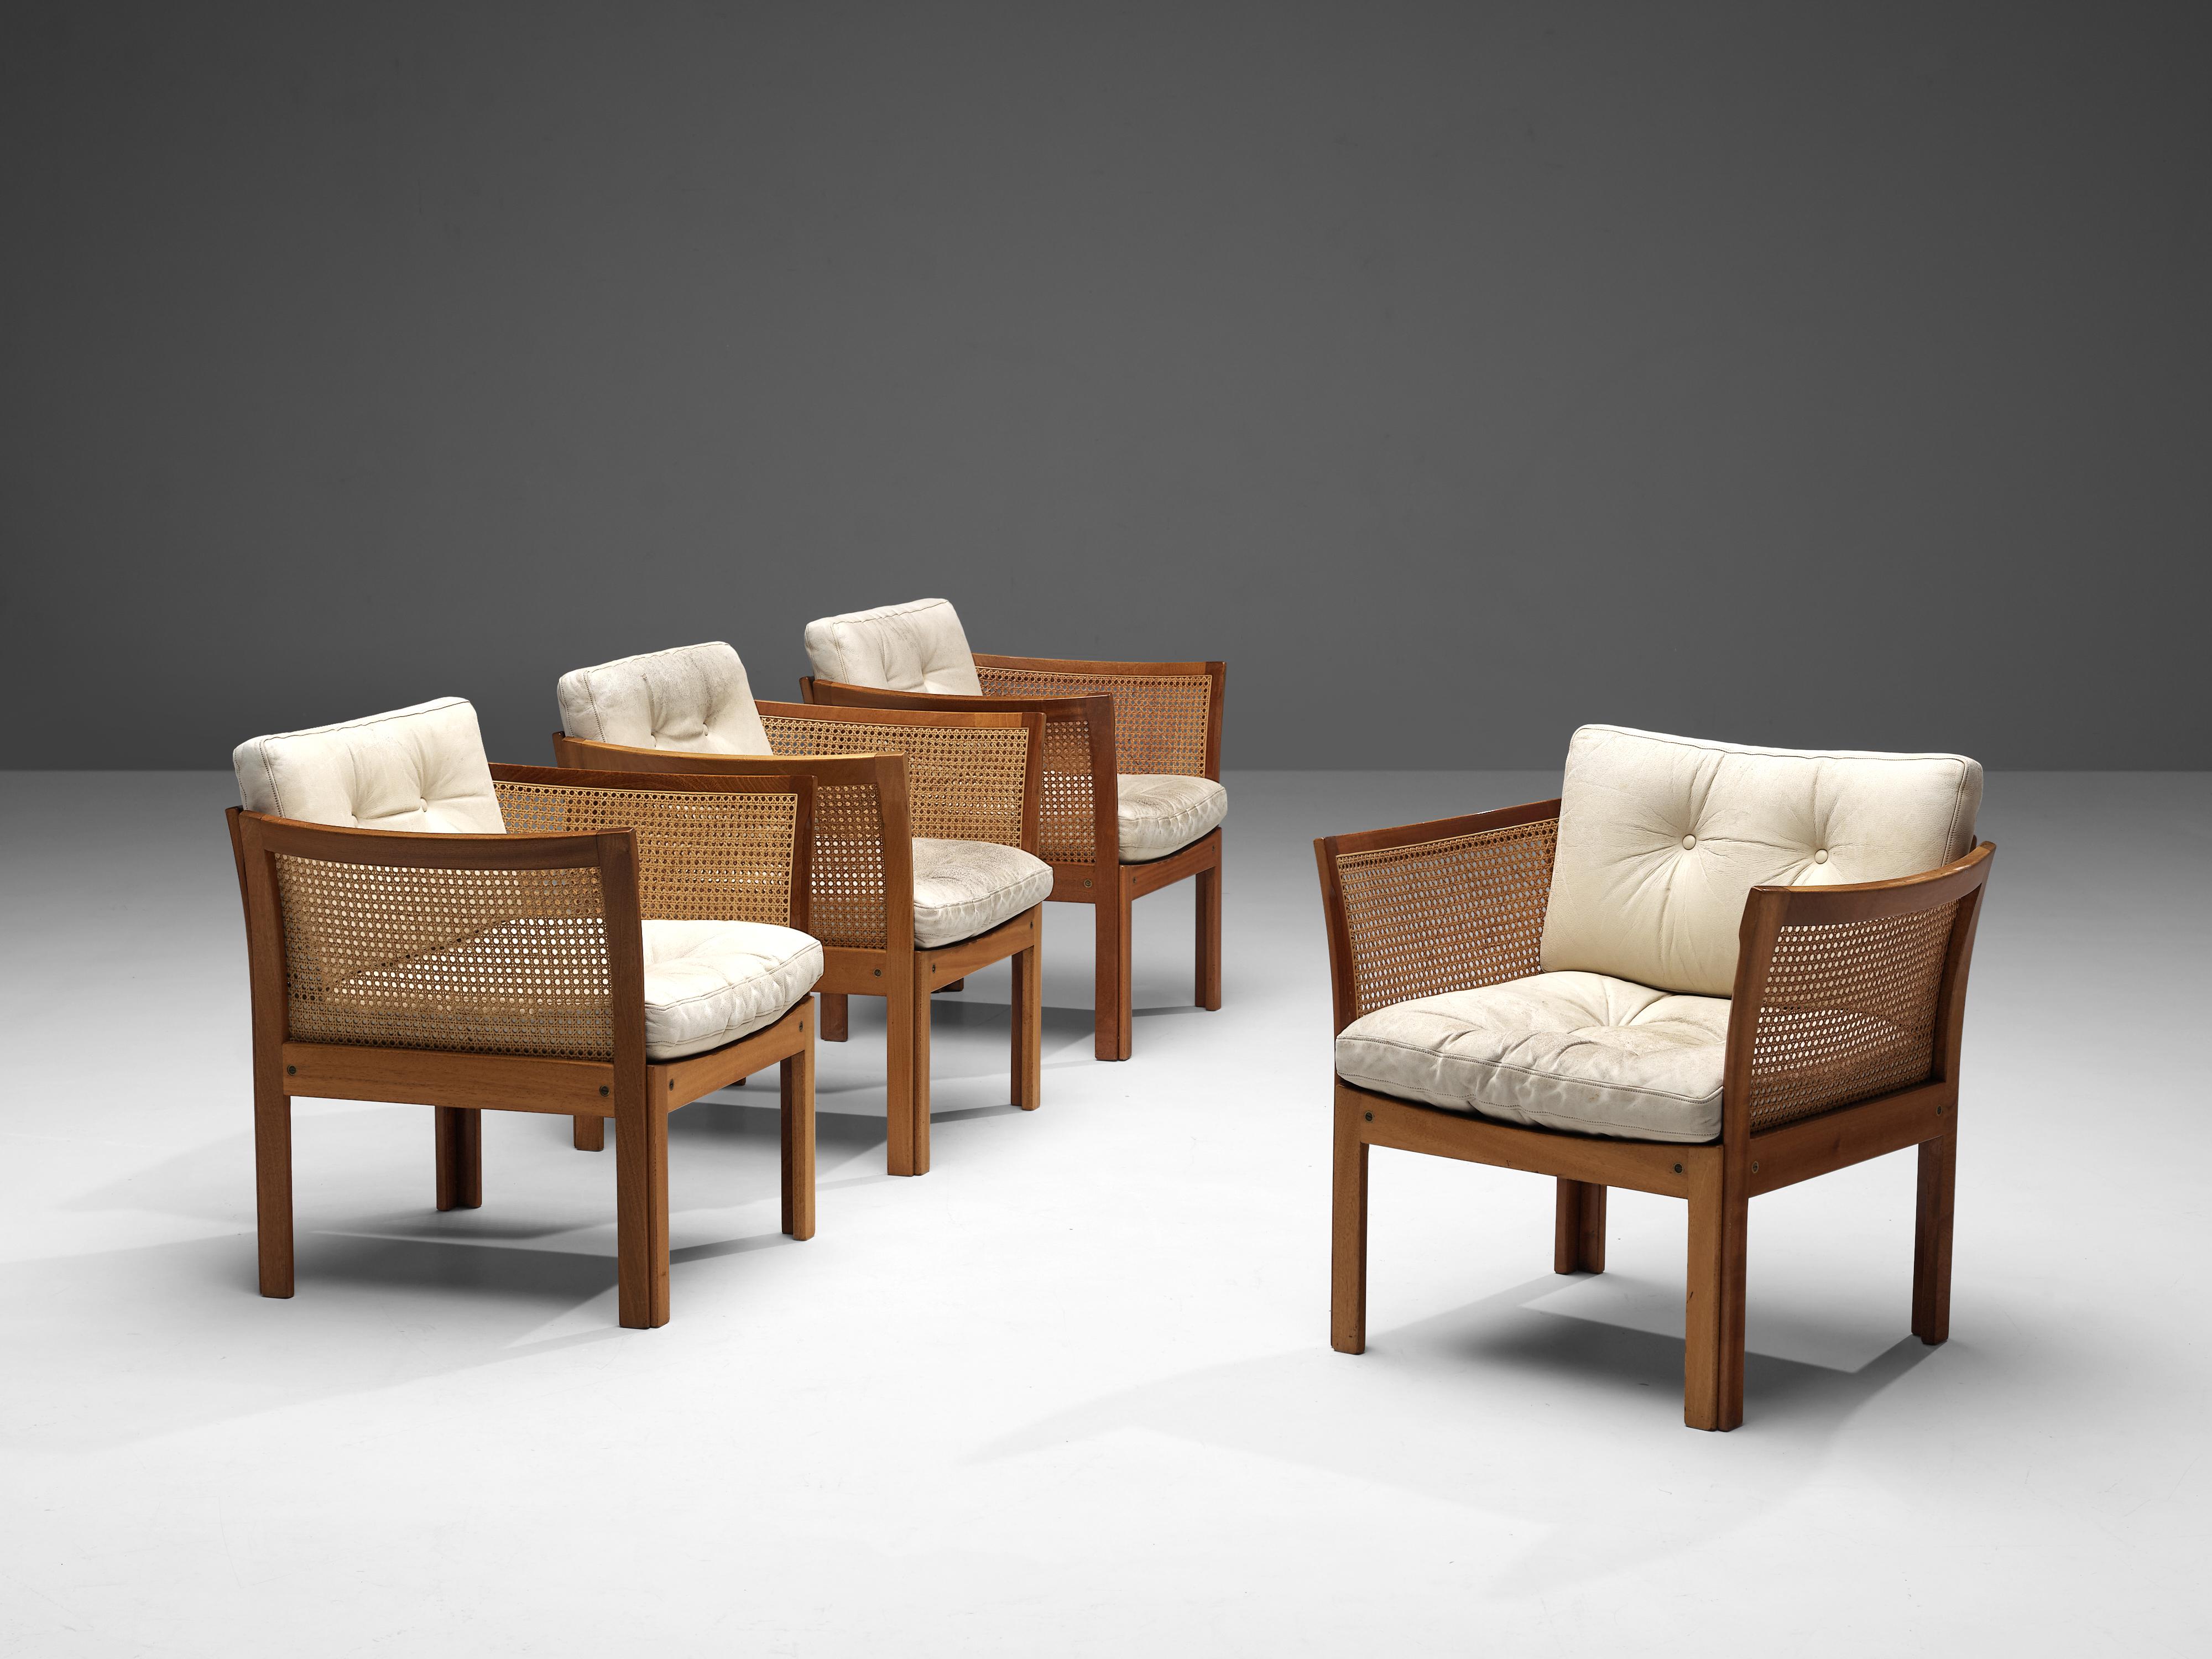 Illum Wikkelsø, lounge chairs, cane, mahogany, leather, Denmark, 1950s

This set of easy chairs by Illum Wikkelsoø shows a beautiful combinations of materials and textures. The chairs' most distinctive feature is the frame in mahogany that curves